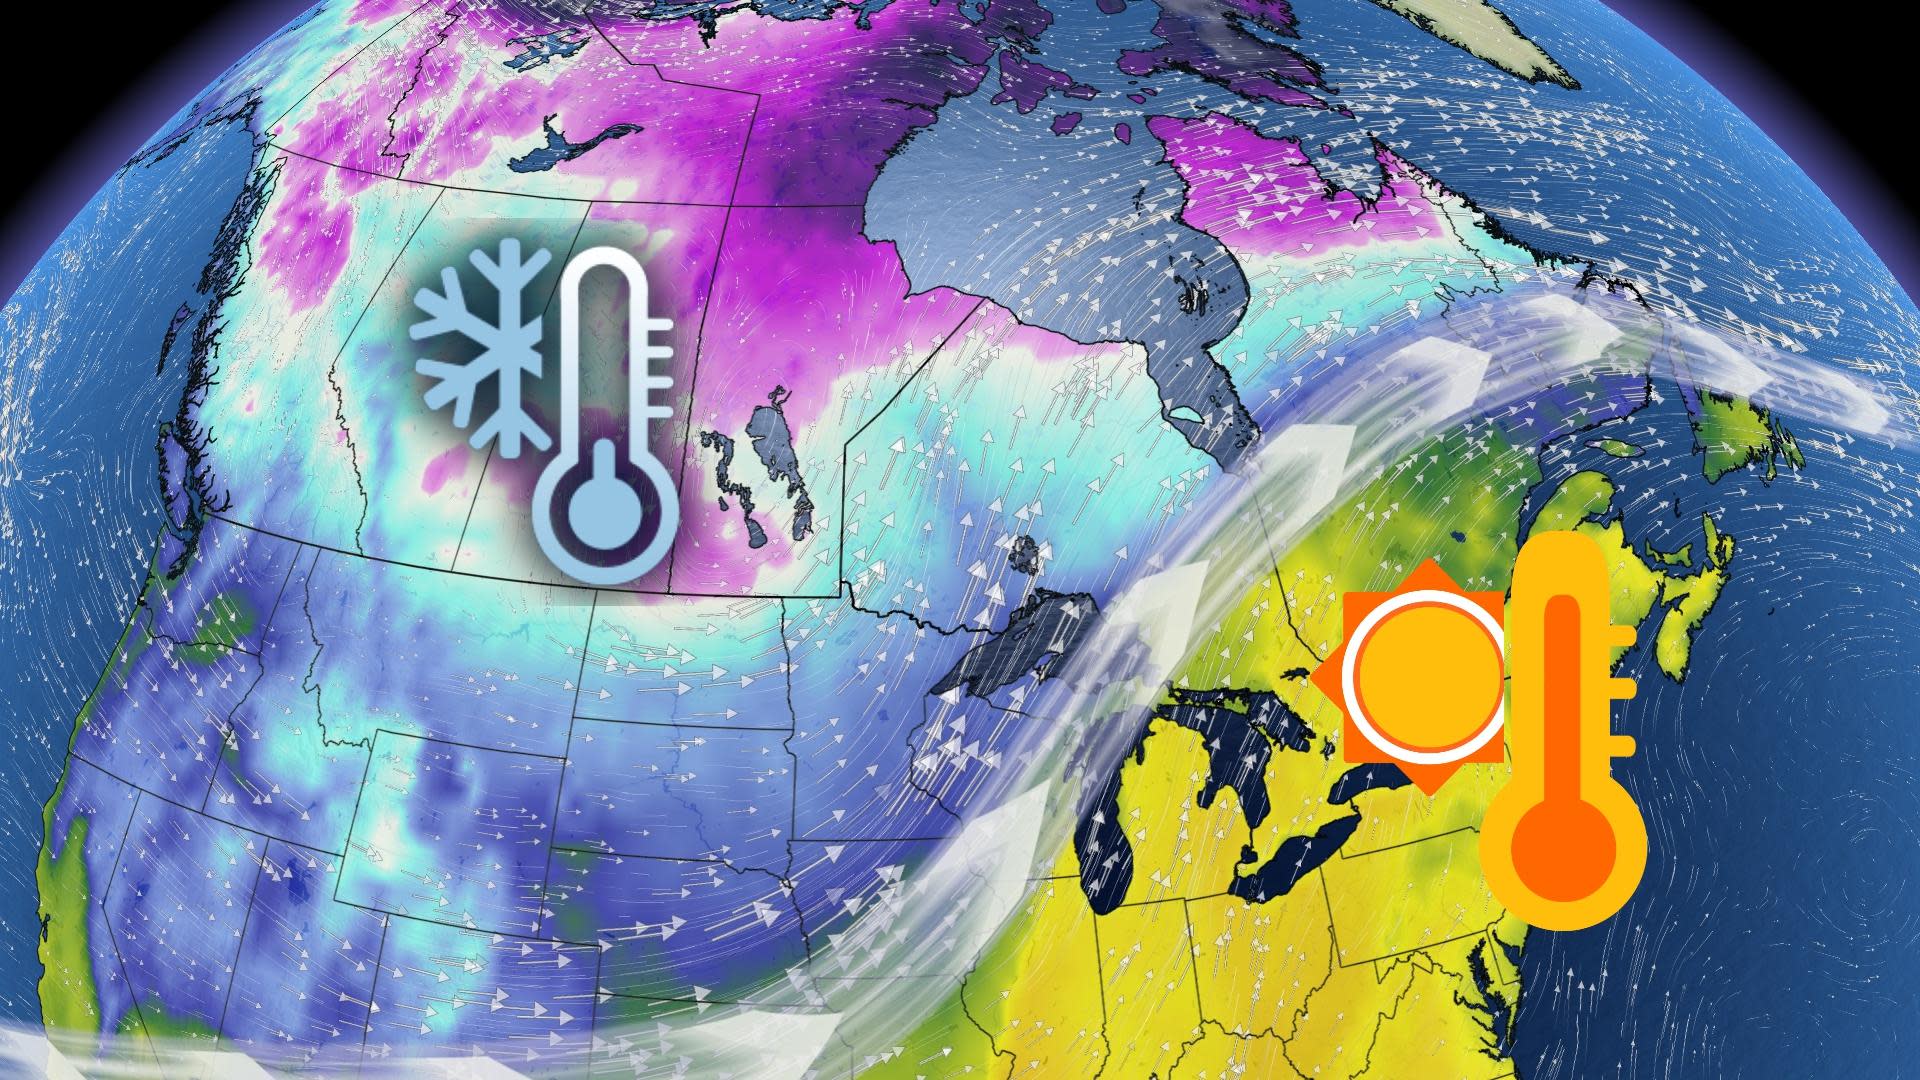 Expect a turbulent March across Canada as the seasons duke it out